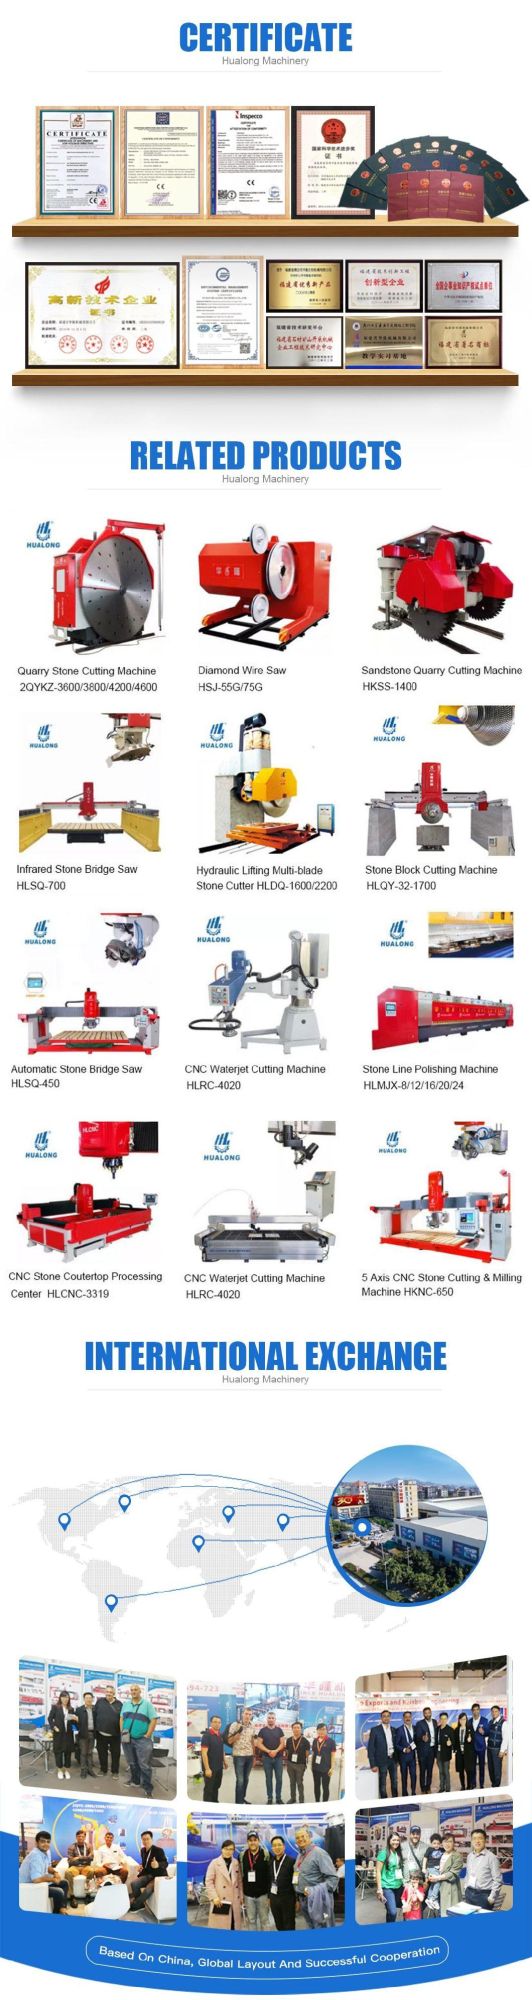 Italian System Monobloc 5 Axis CNC Bridge Saw Sink Cutout Stone Cutting Machine for Granite Marble Porcelain Sintered Stone Countertop in Argentina with CE 380V